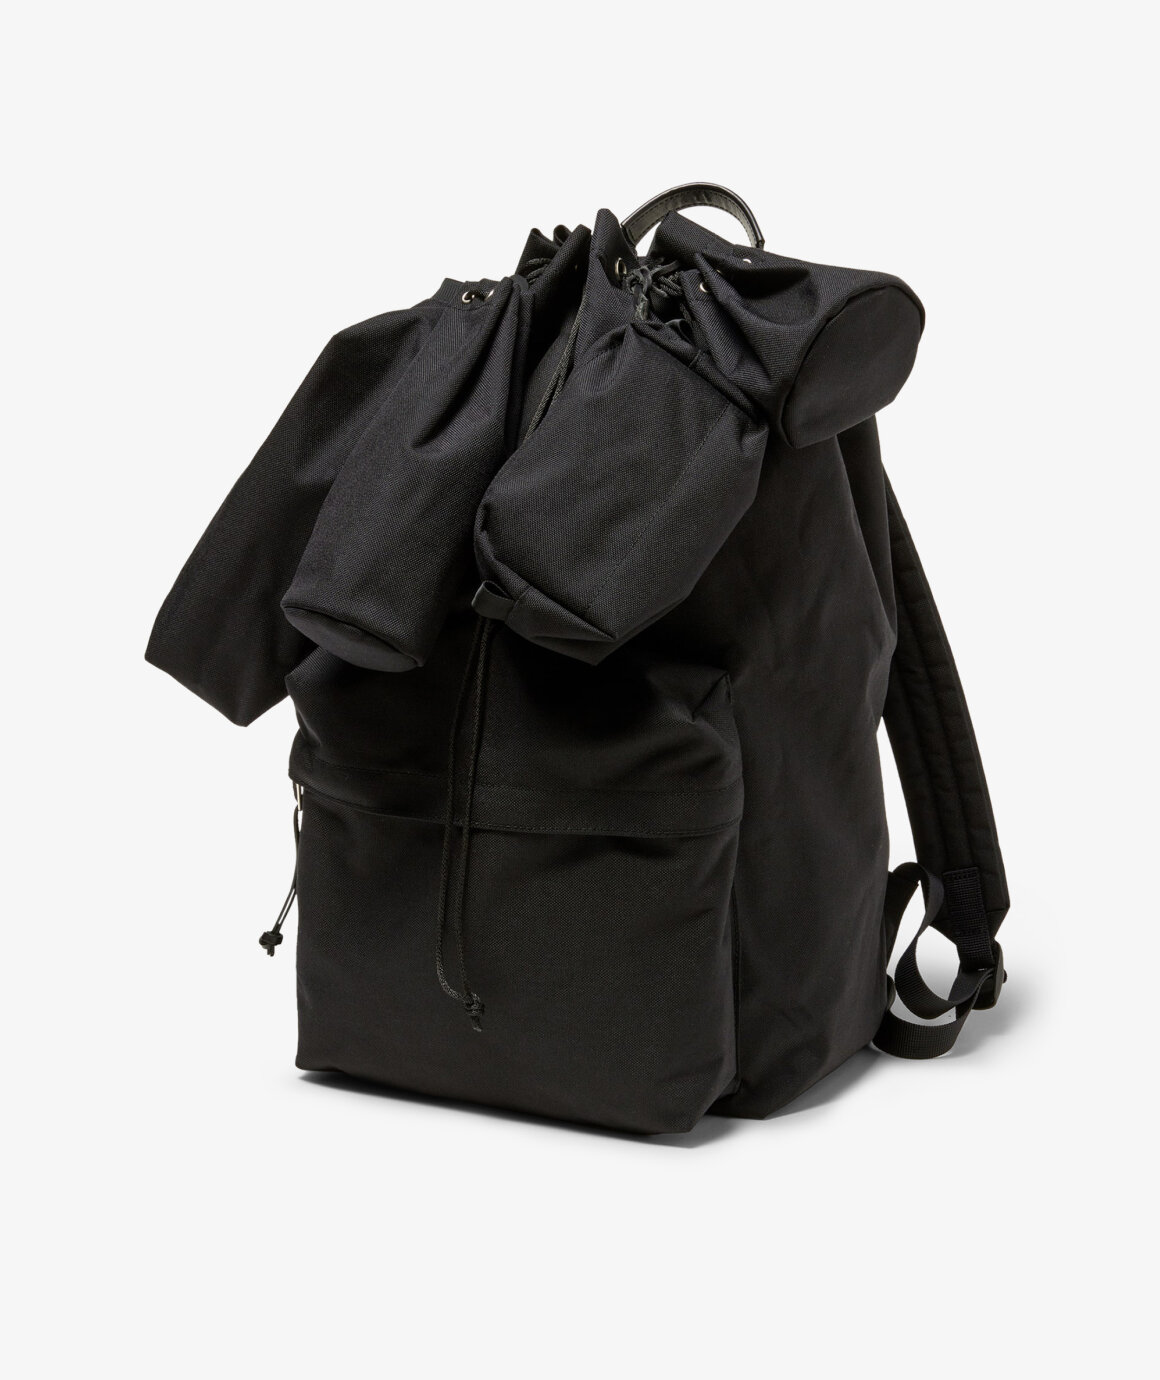 Norse Store | Shipping Worldwide - Auralee Large Backpack Set By Aeta ...